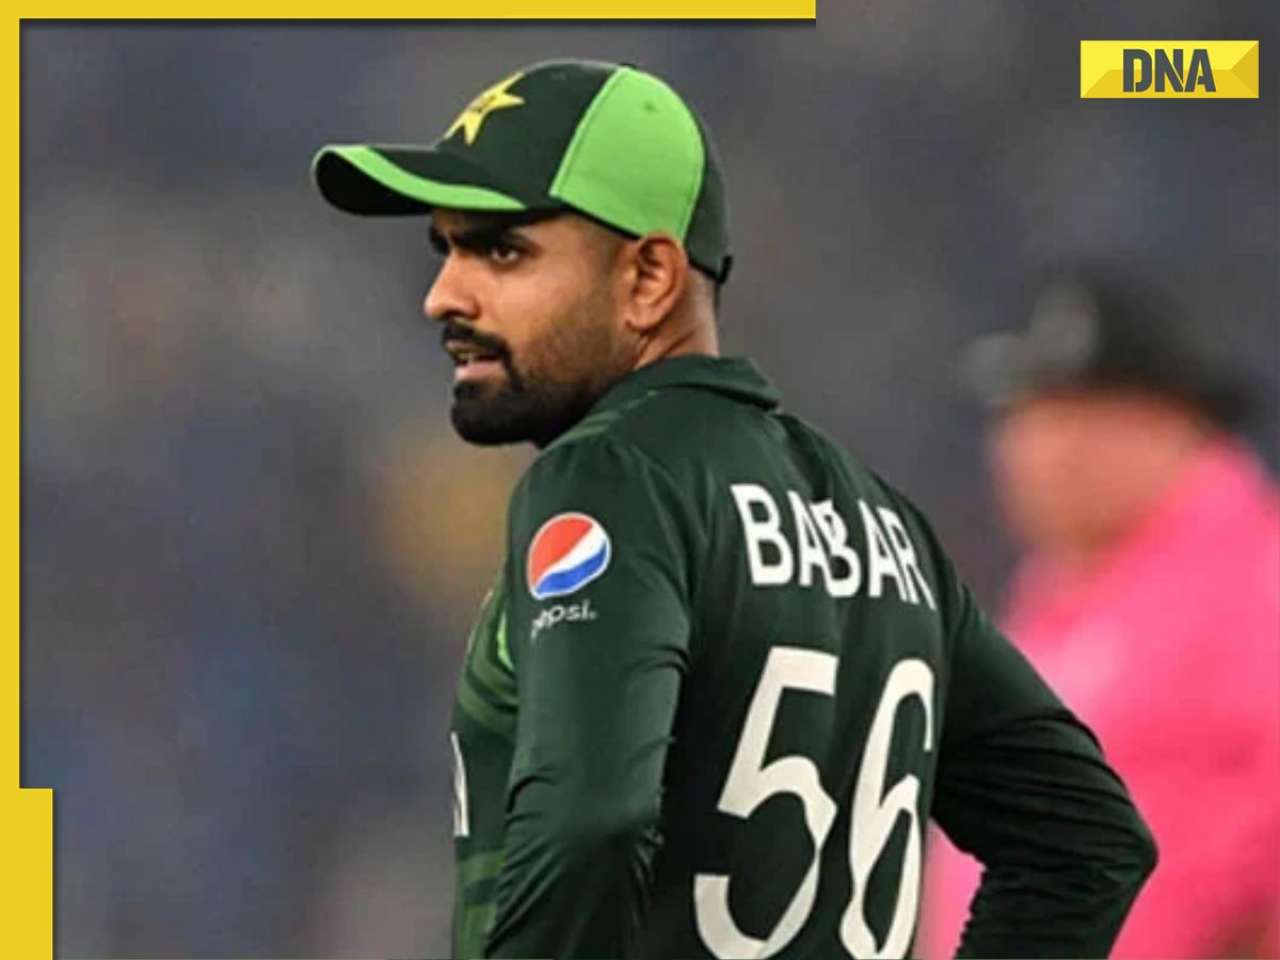 Babar Azam replaces Shaheen Afridi as Pakistan’s white-ball captain ahead of T20 World Cup